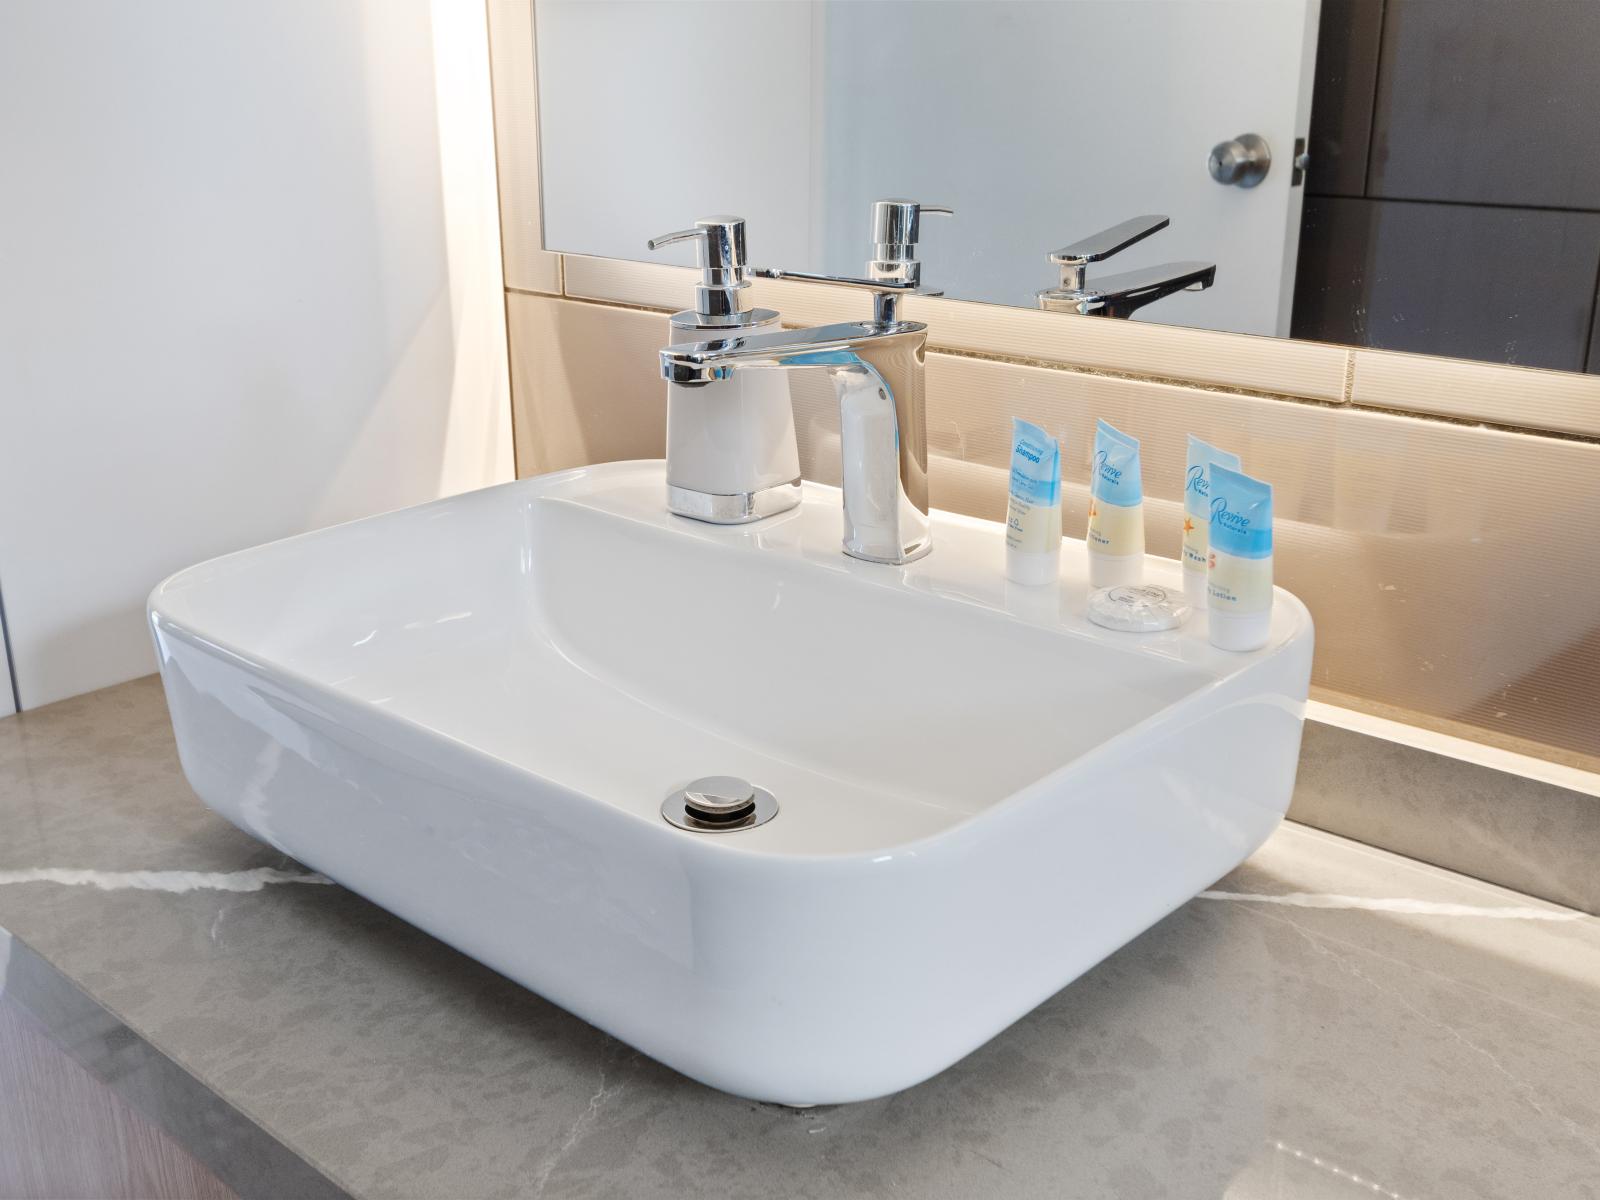 Classy Bathroom of the apartment in Noord, Aruba - Beautiful Vanity with large size wall mirror - Sufficient storage space - Neat and clean toilet seat - Availability of all bathroom amenities - Stunning shower area